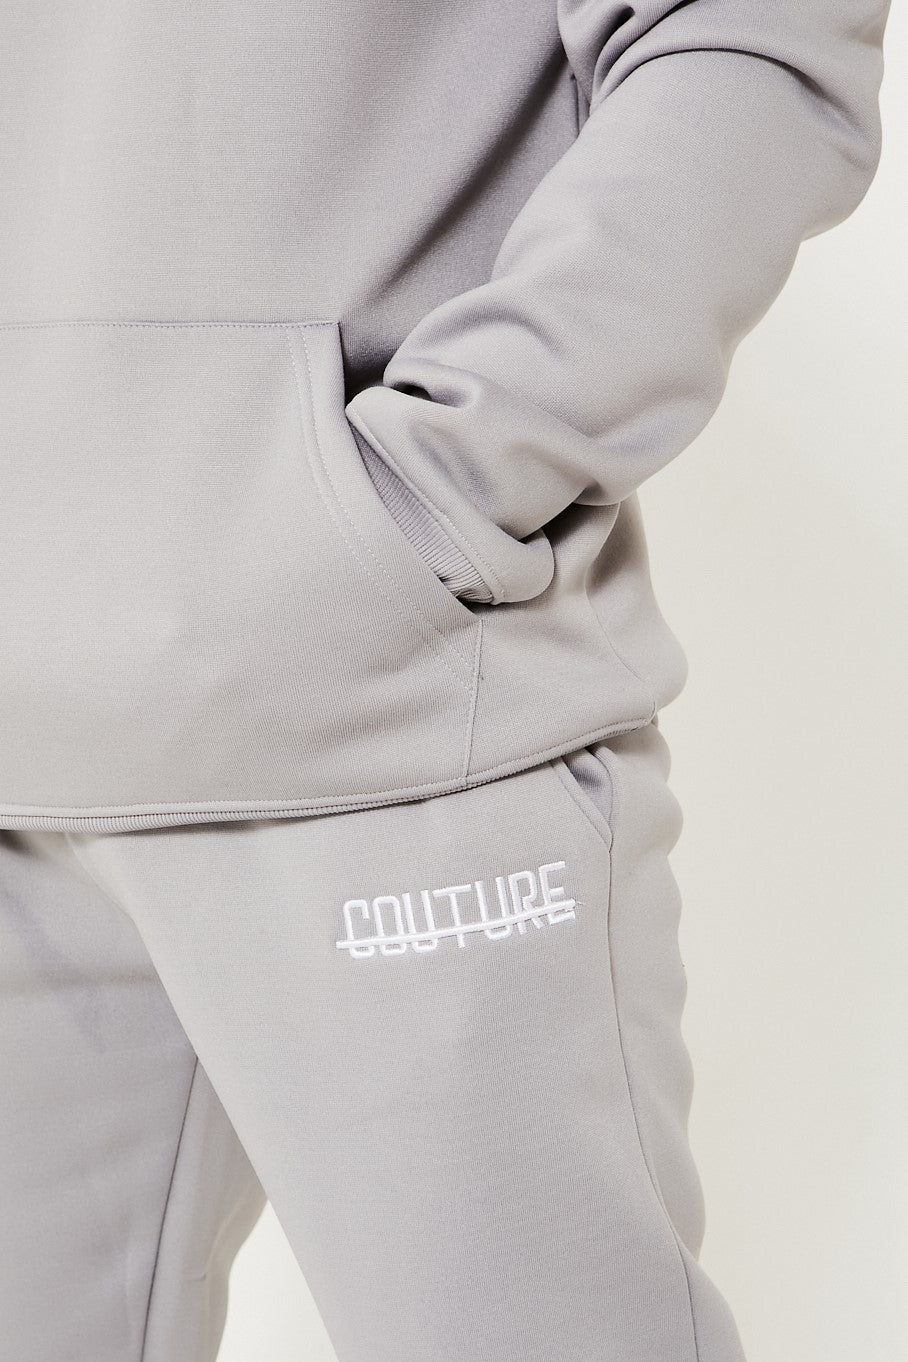 Fresh Couture Hooded Tracksuit - Light Grey